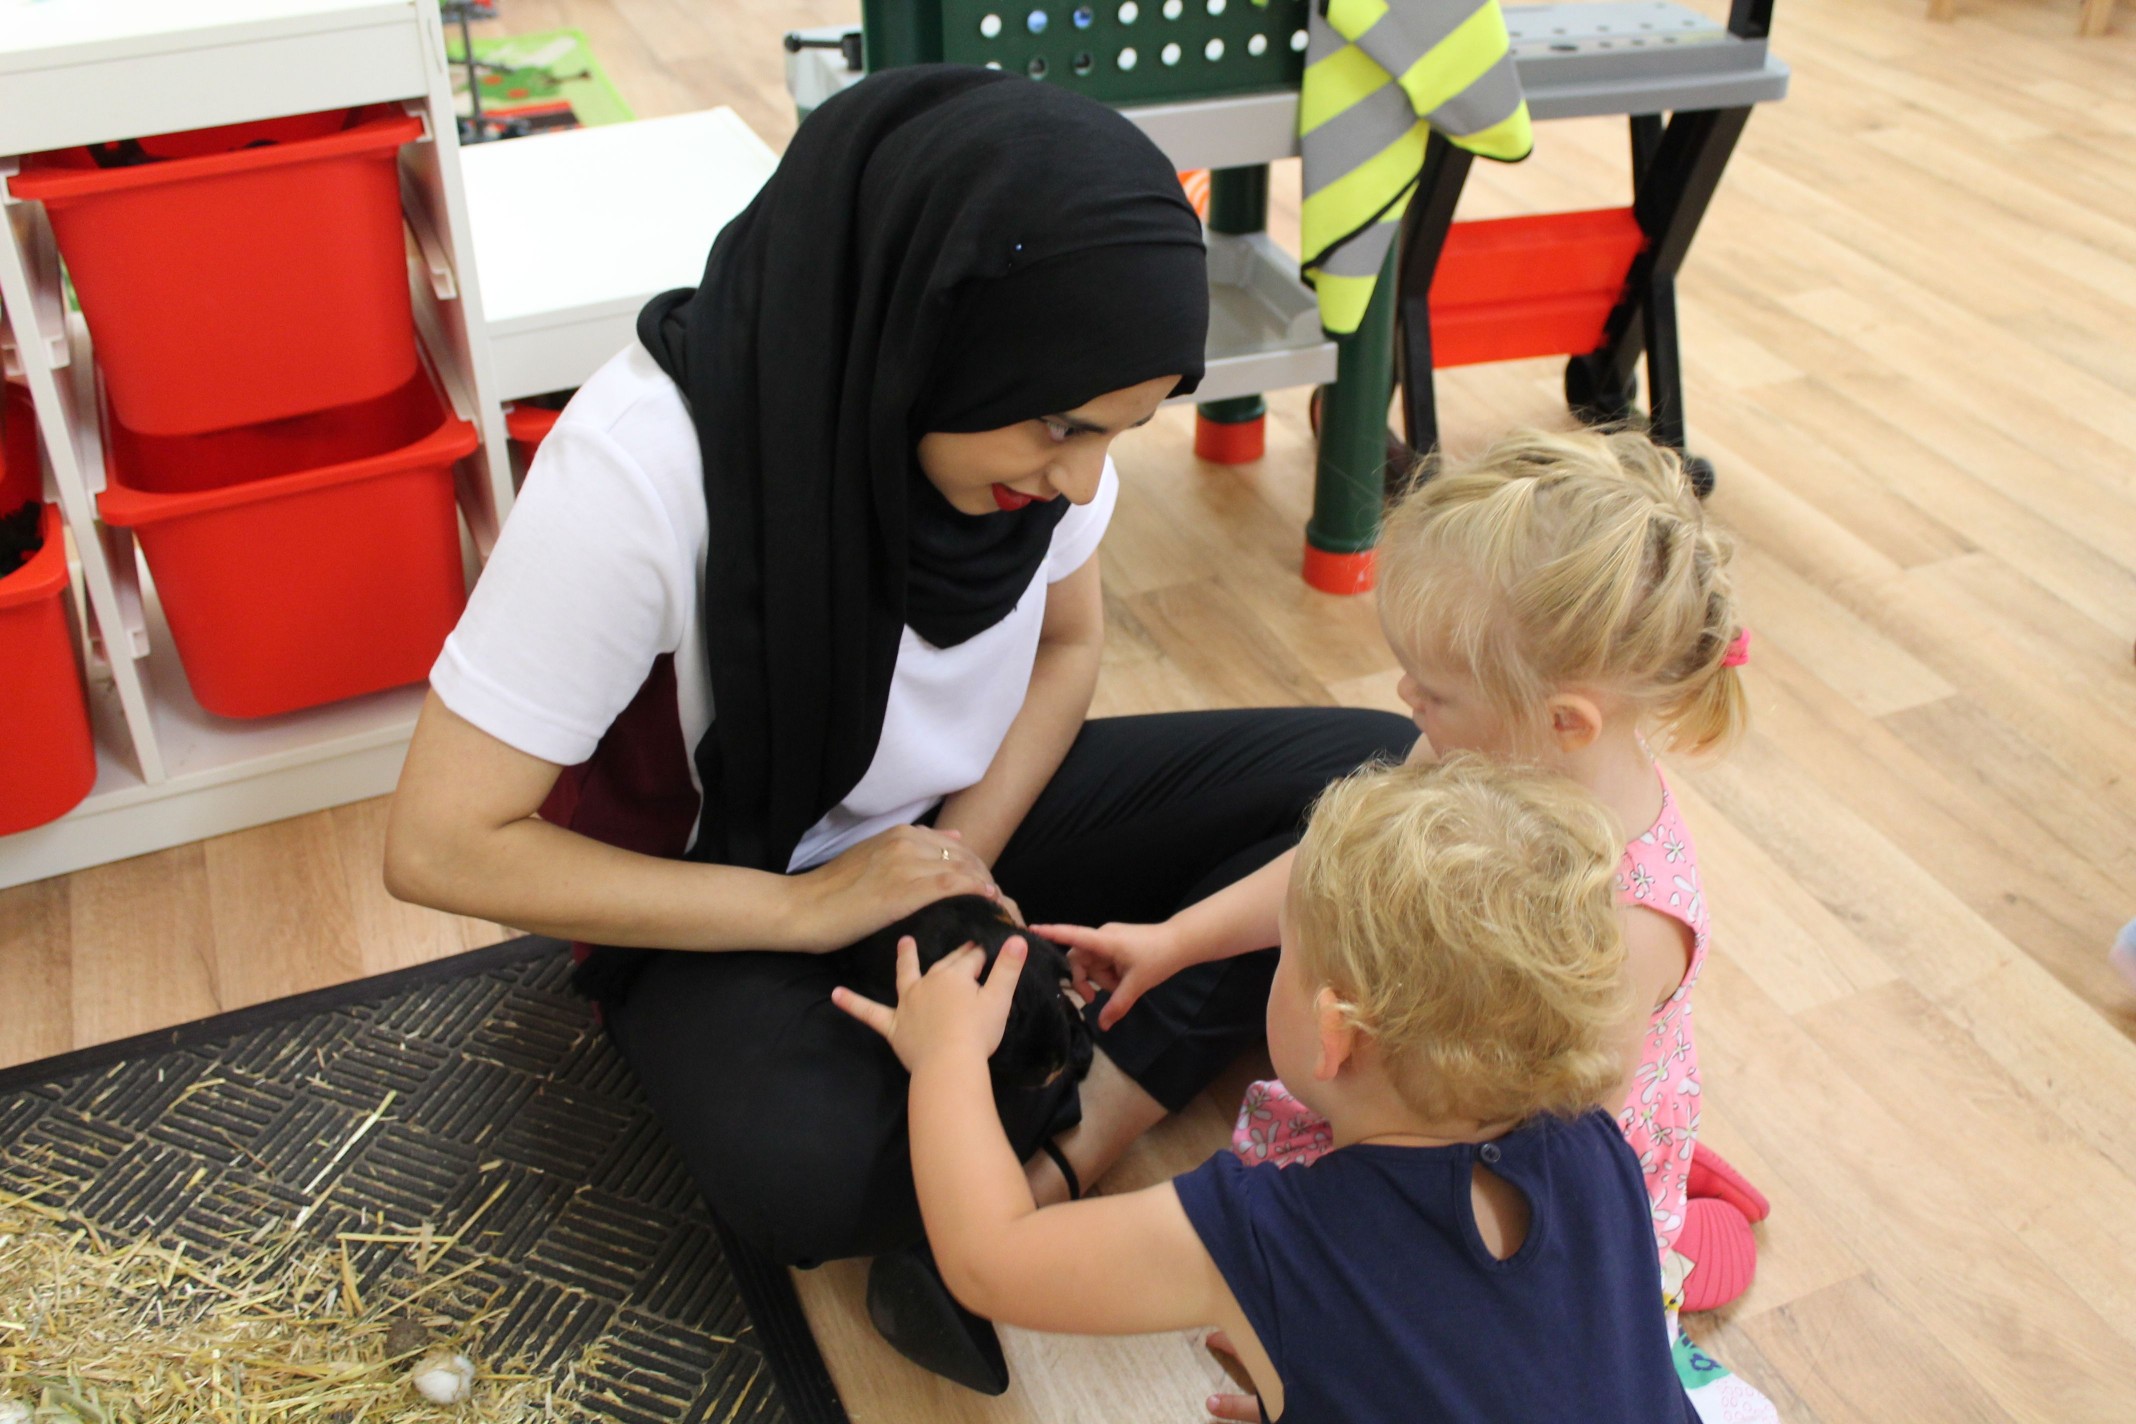 Saliha using the nursery guinea pig to teach the children different concepts and vocabulary.